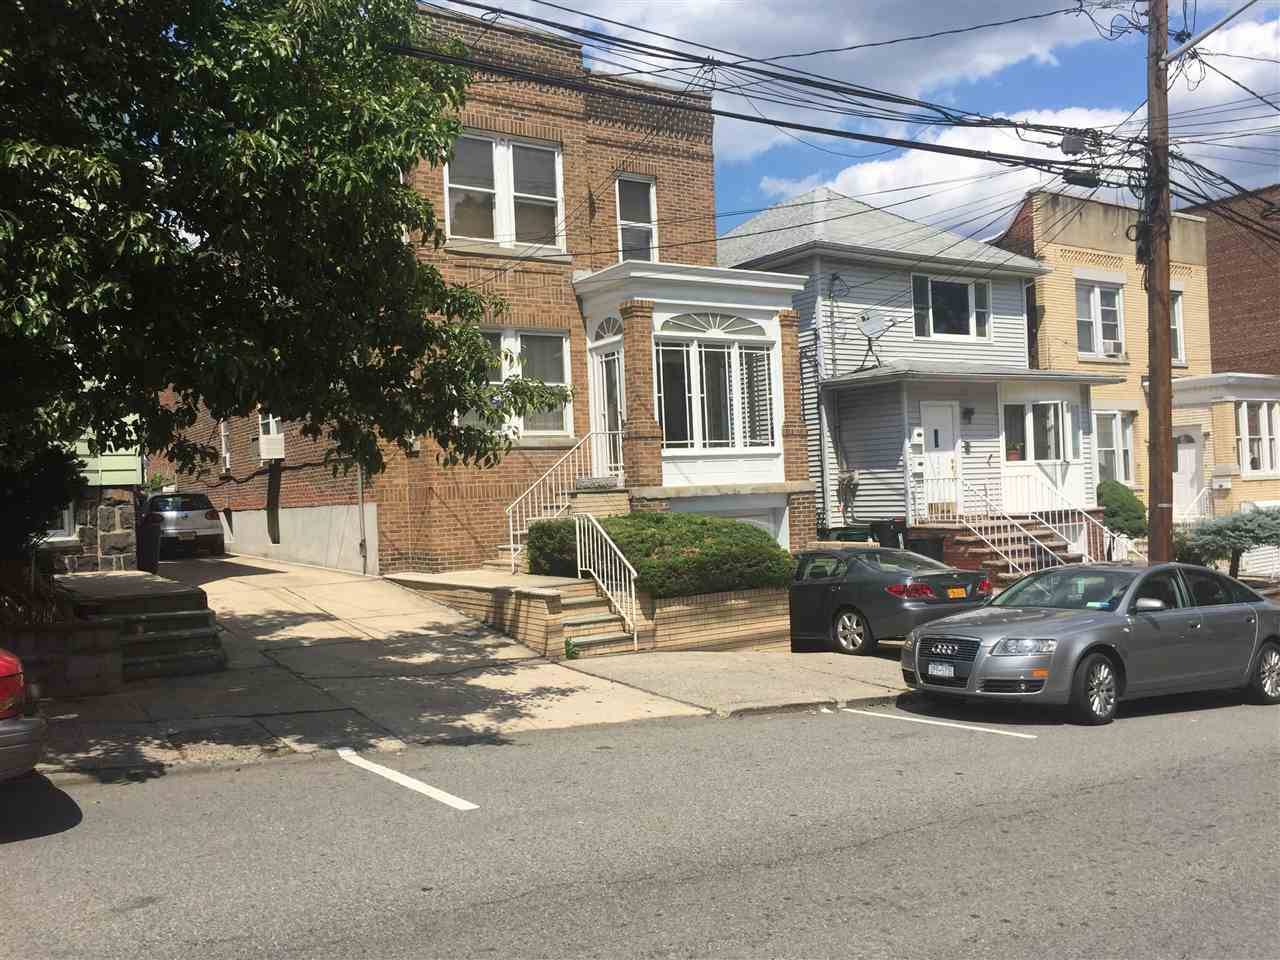 Just renovated three bedroom apartment - 3 BR New Jersey